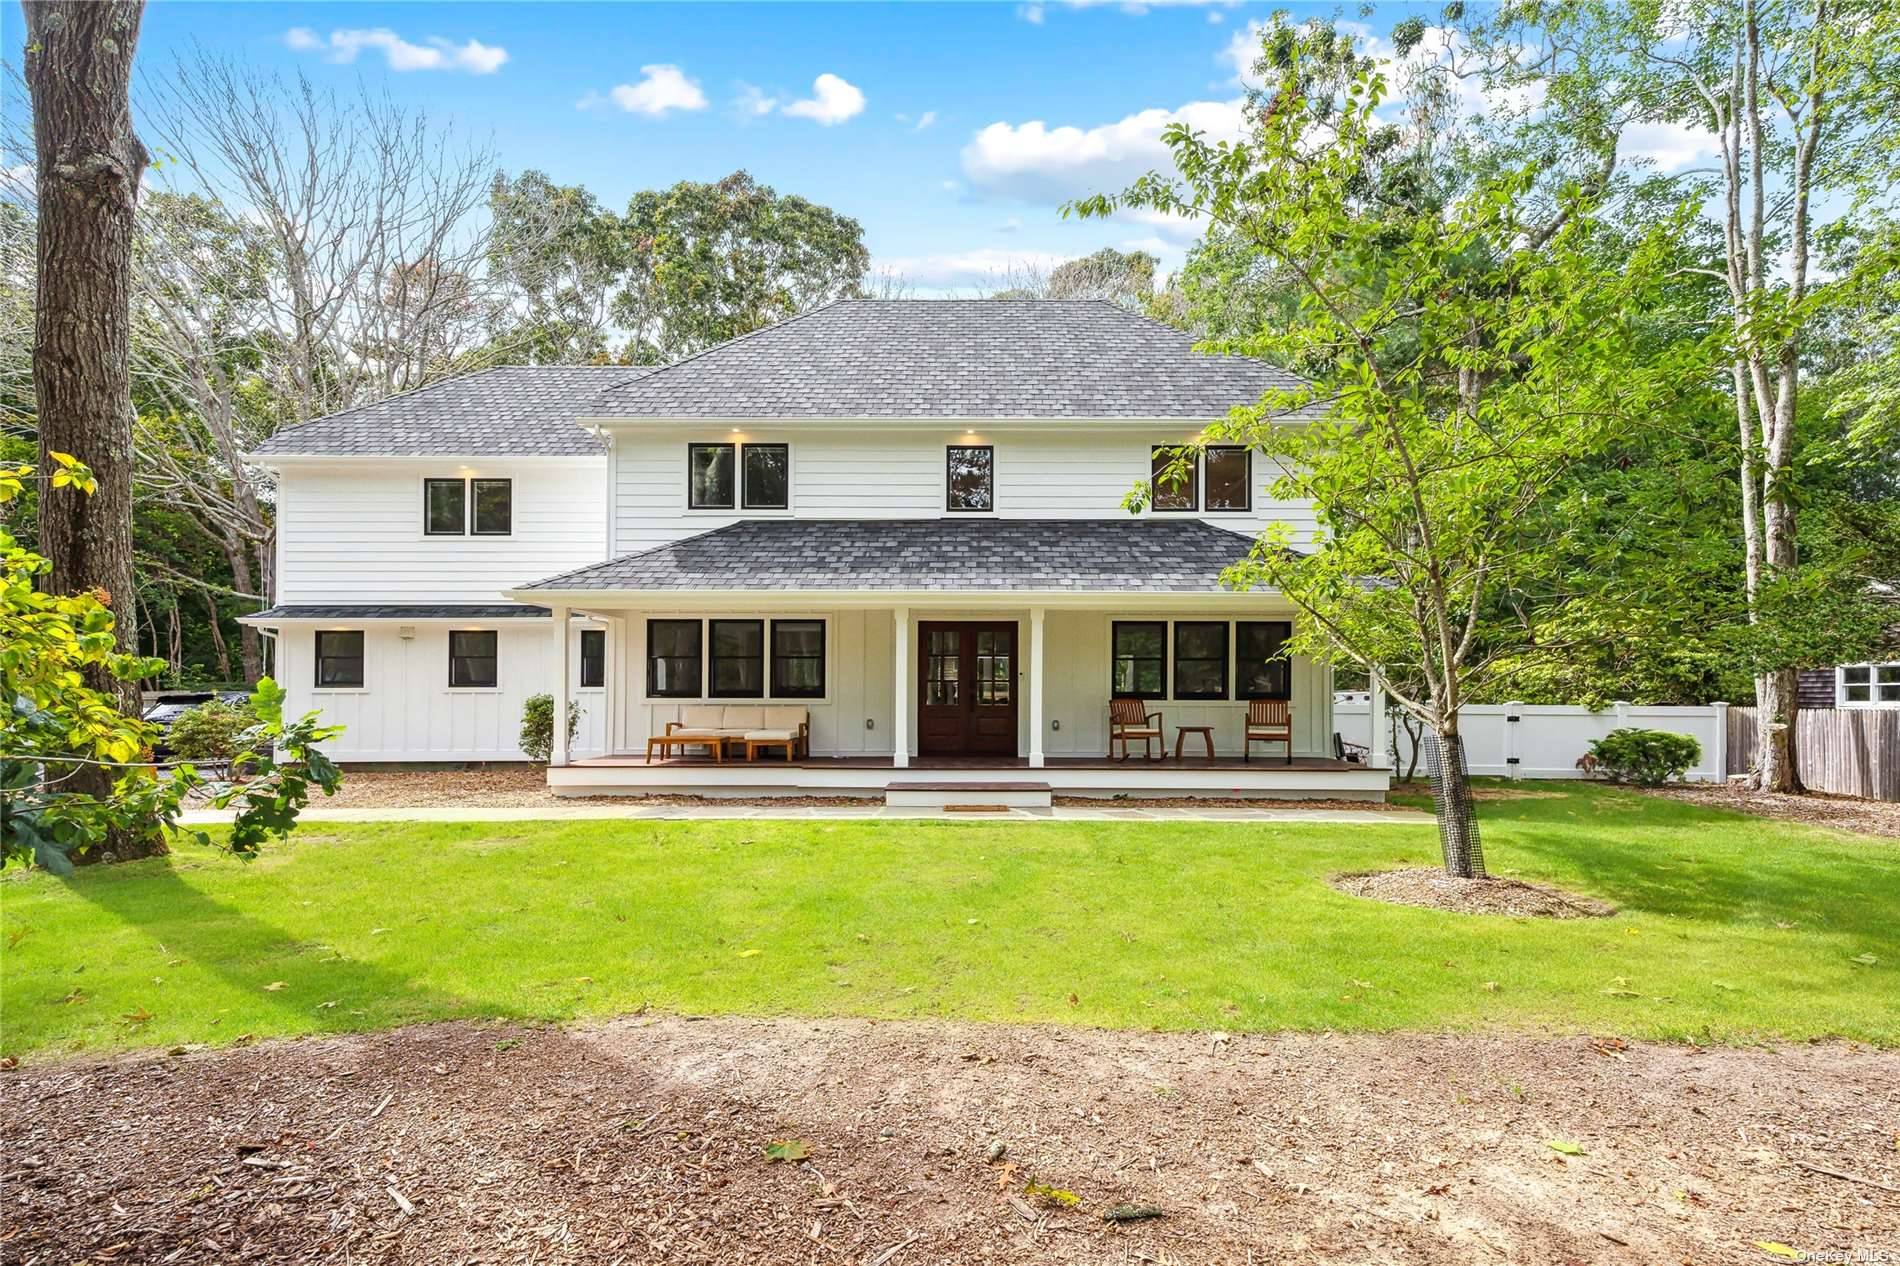 Welcome home to 85 Jagger Lane in Westhampton !